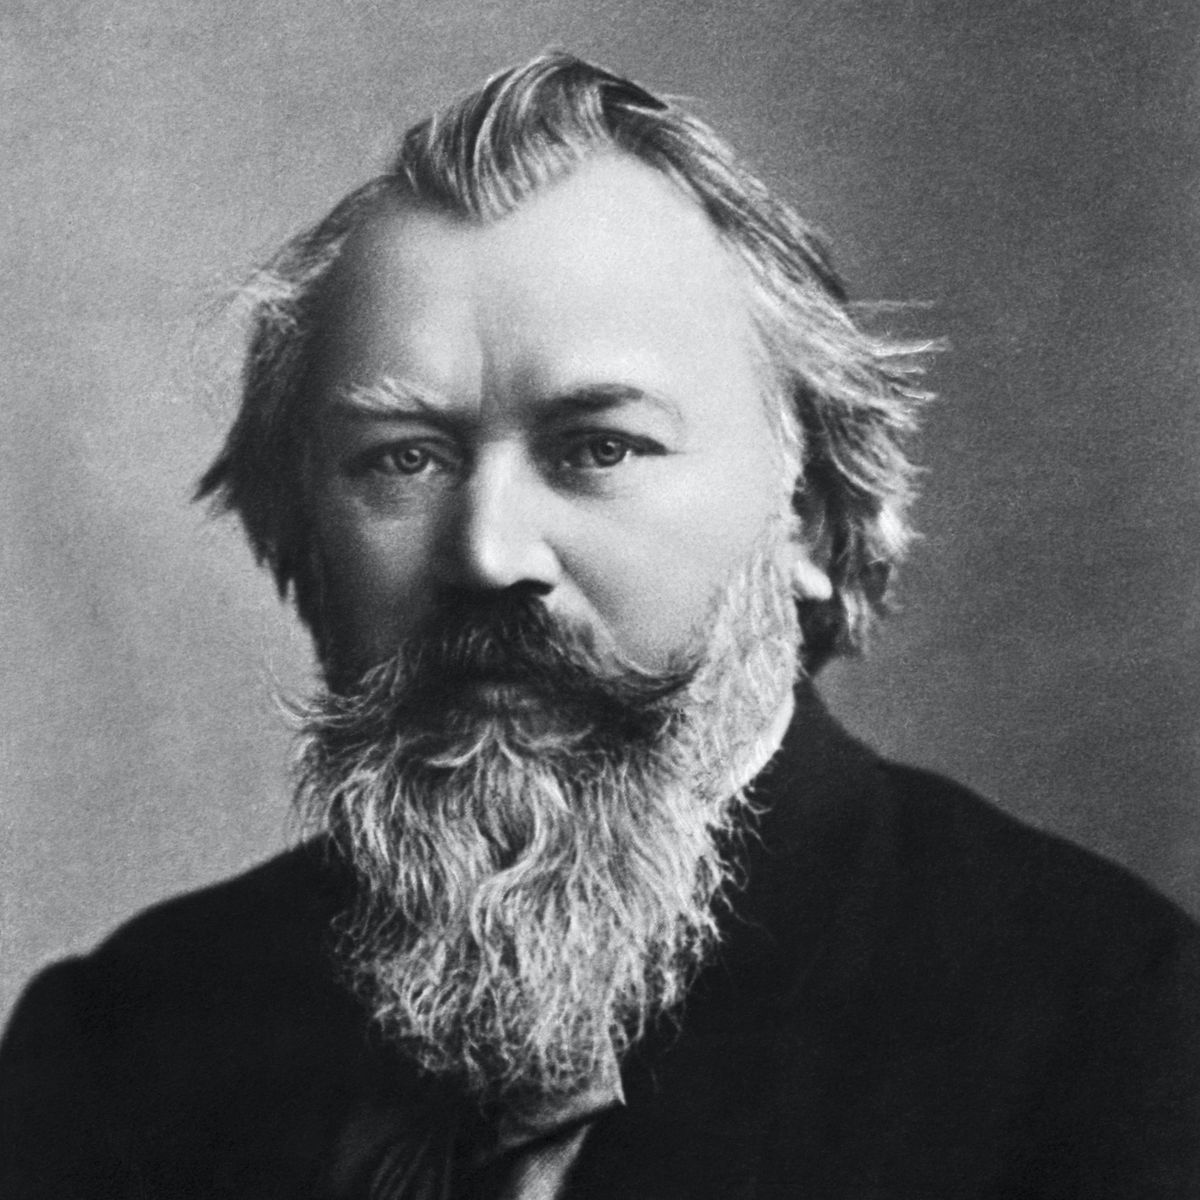 Brahms, all in